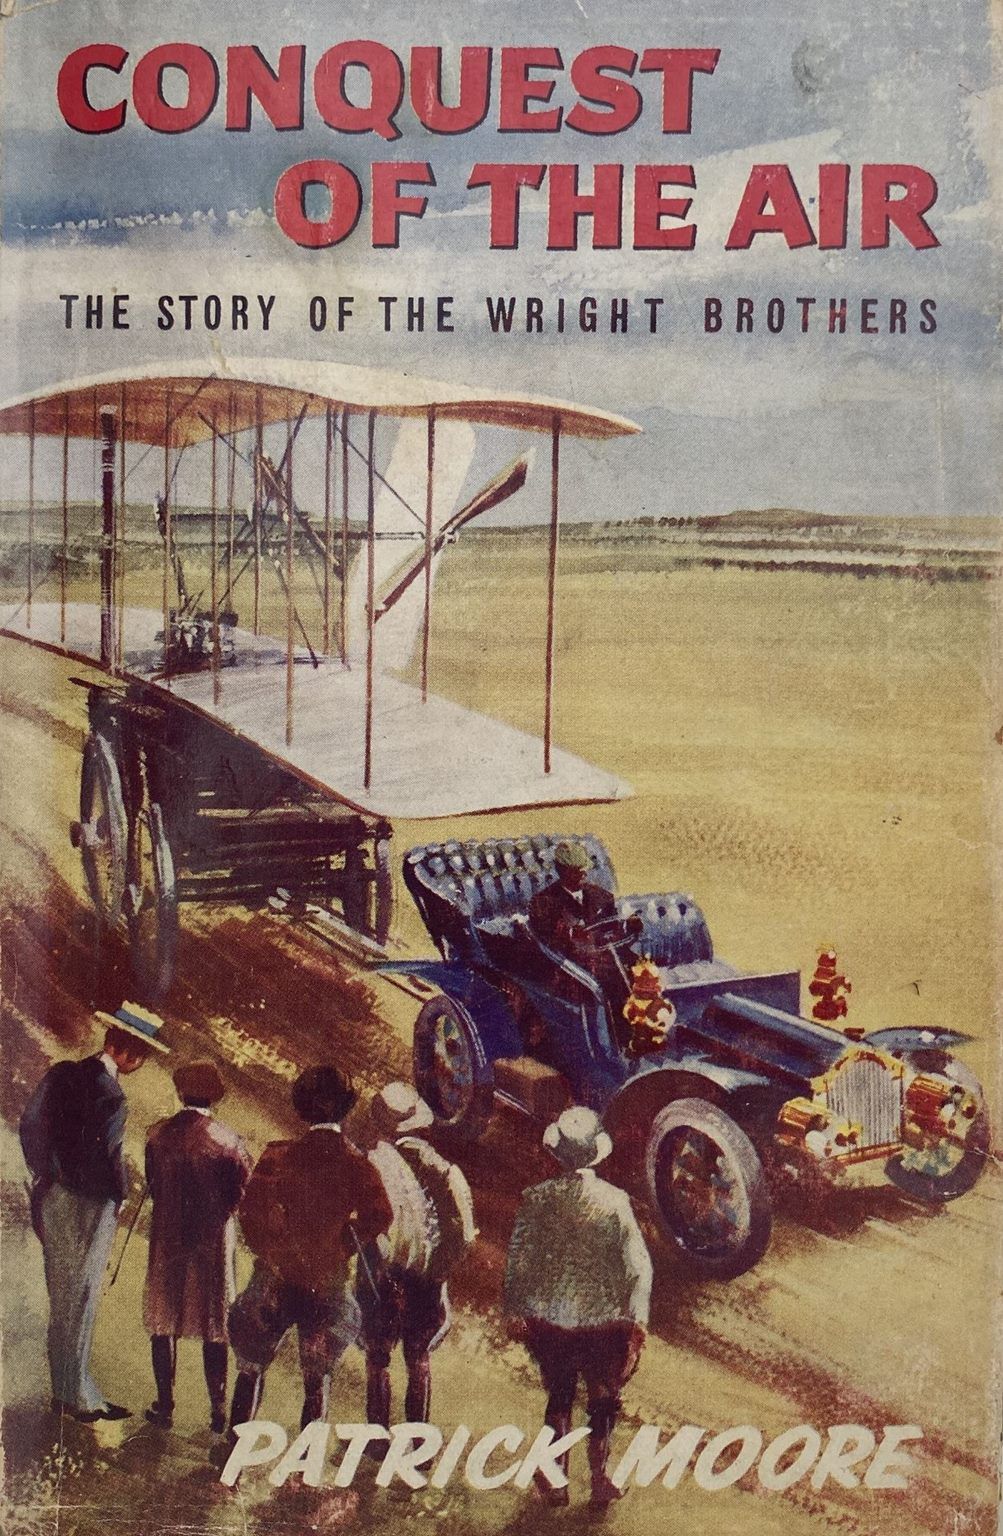 CONQUEST OF THE AIR: The Story of the Wright Brothers